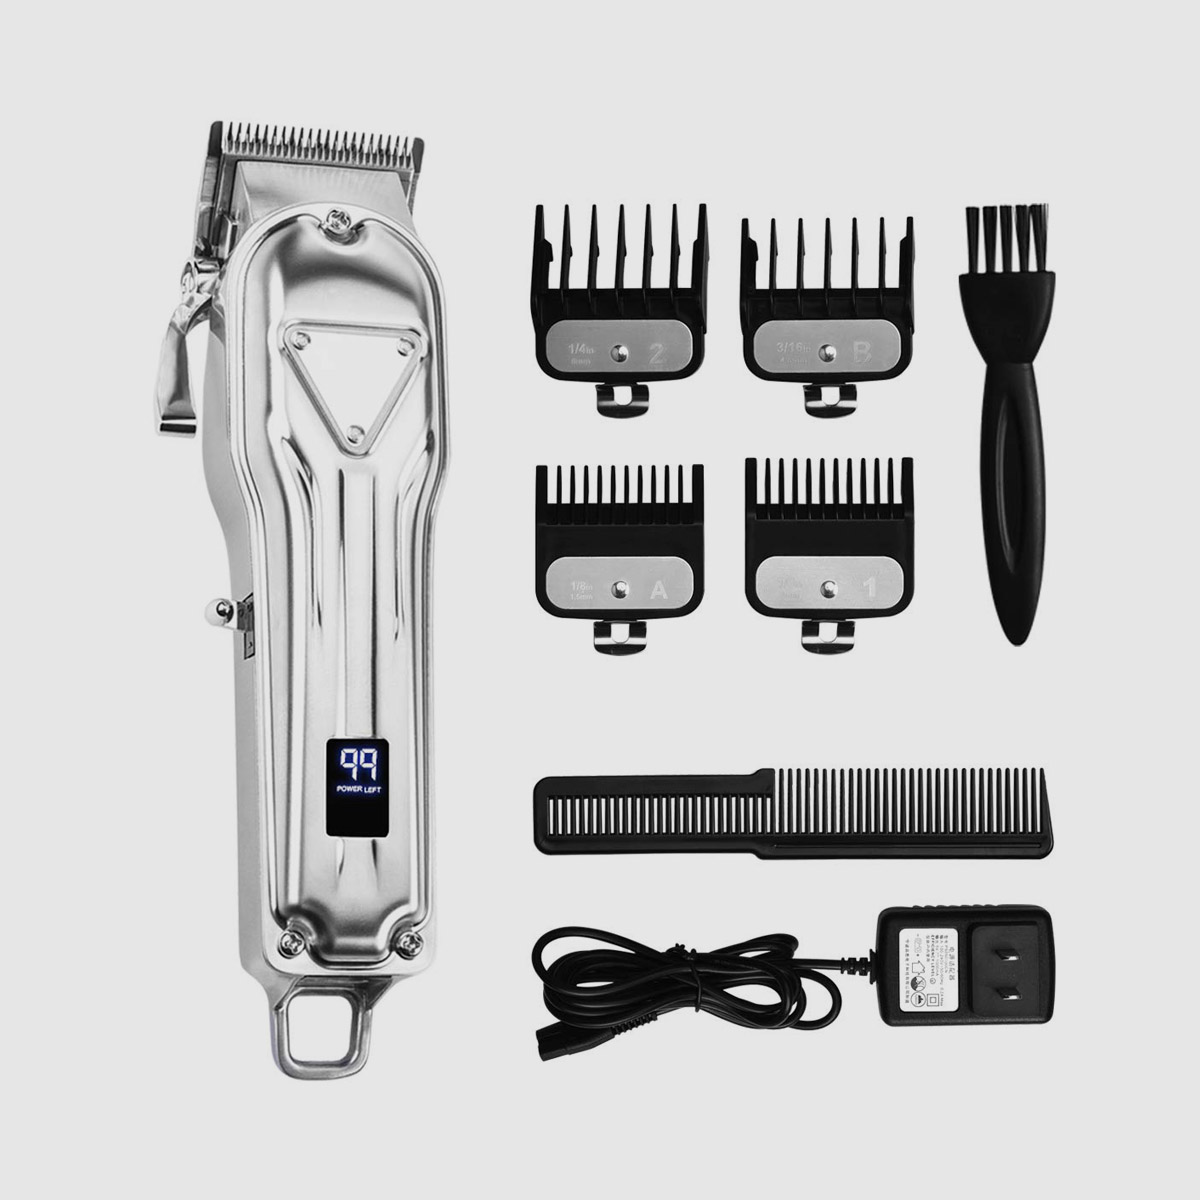 Pro Cordless Hair Clippers for Men Stylists Barbers Kids Home Using